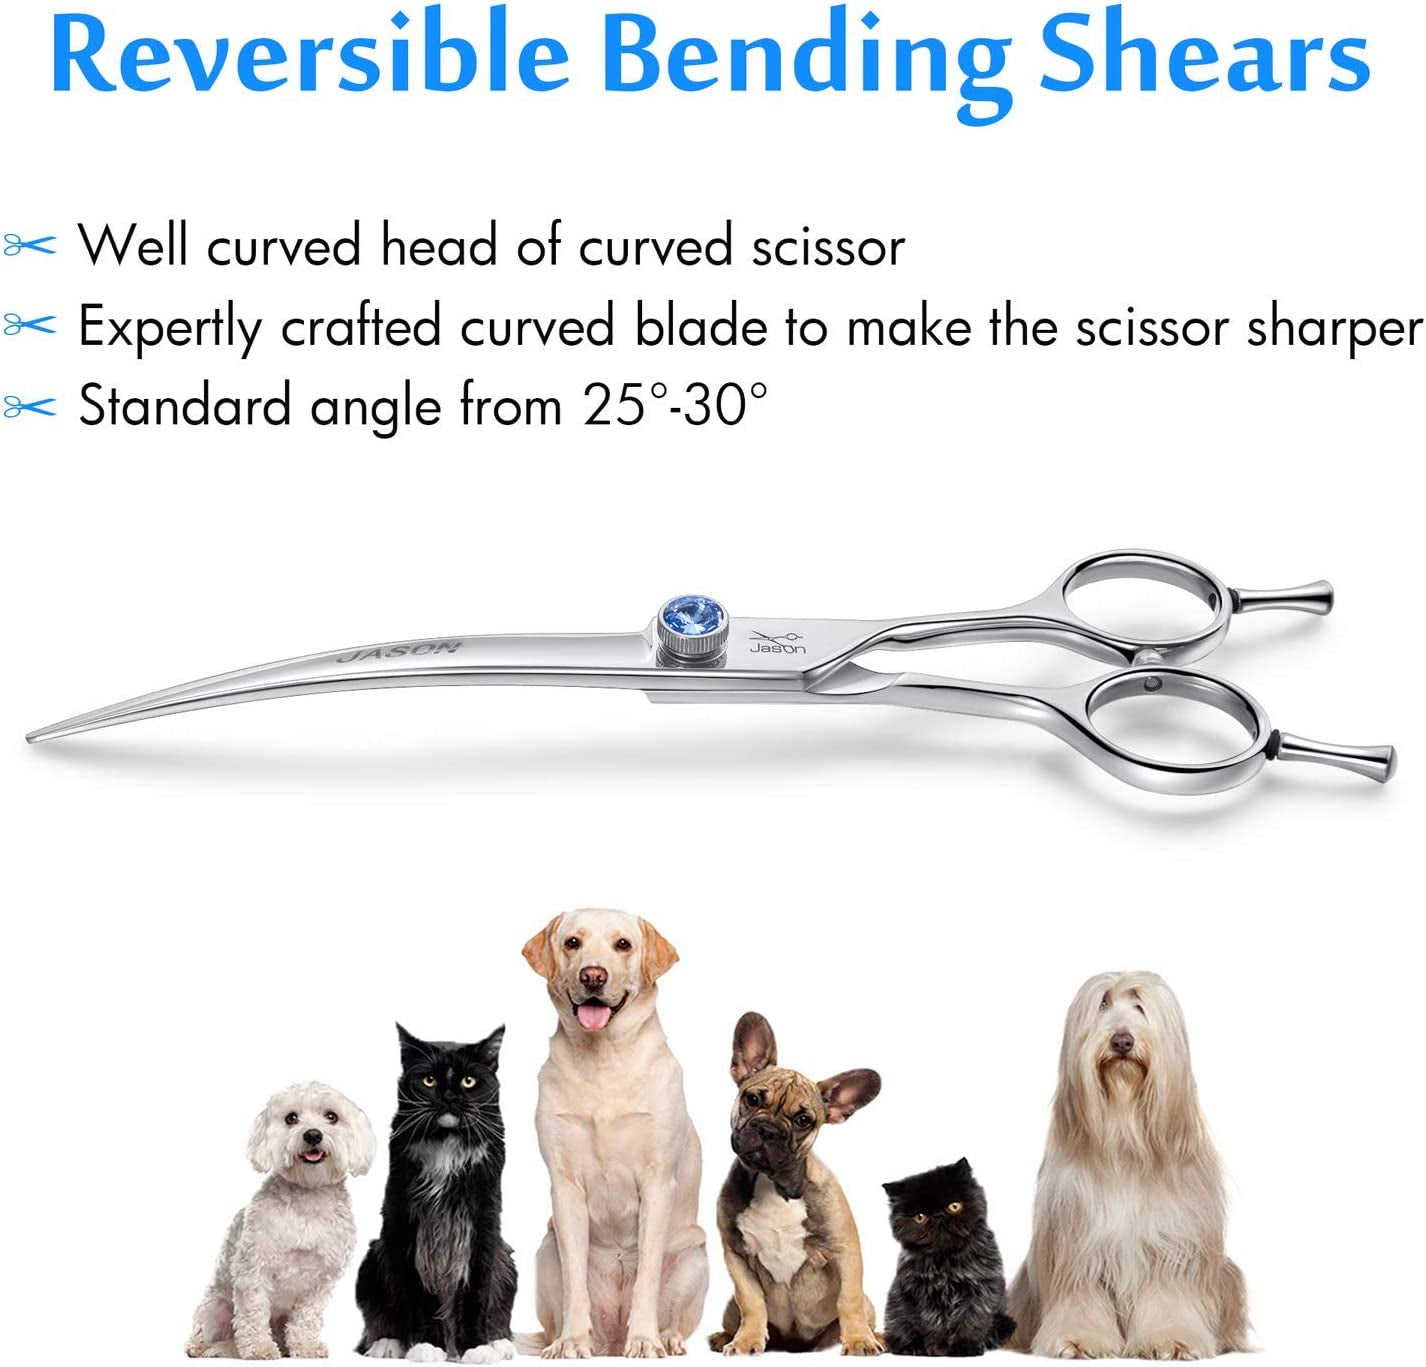 7" Curved Dog Grooming Scissors, Ergonomic Pets Cats Trimming Shears with Offset Handle and a Jewelled Screw for Right Handed Groomers, Sharp, Comfortable, Light-Weight